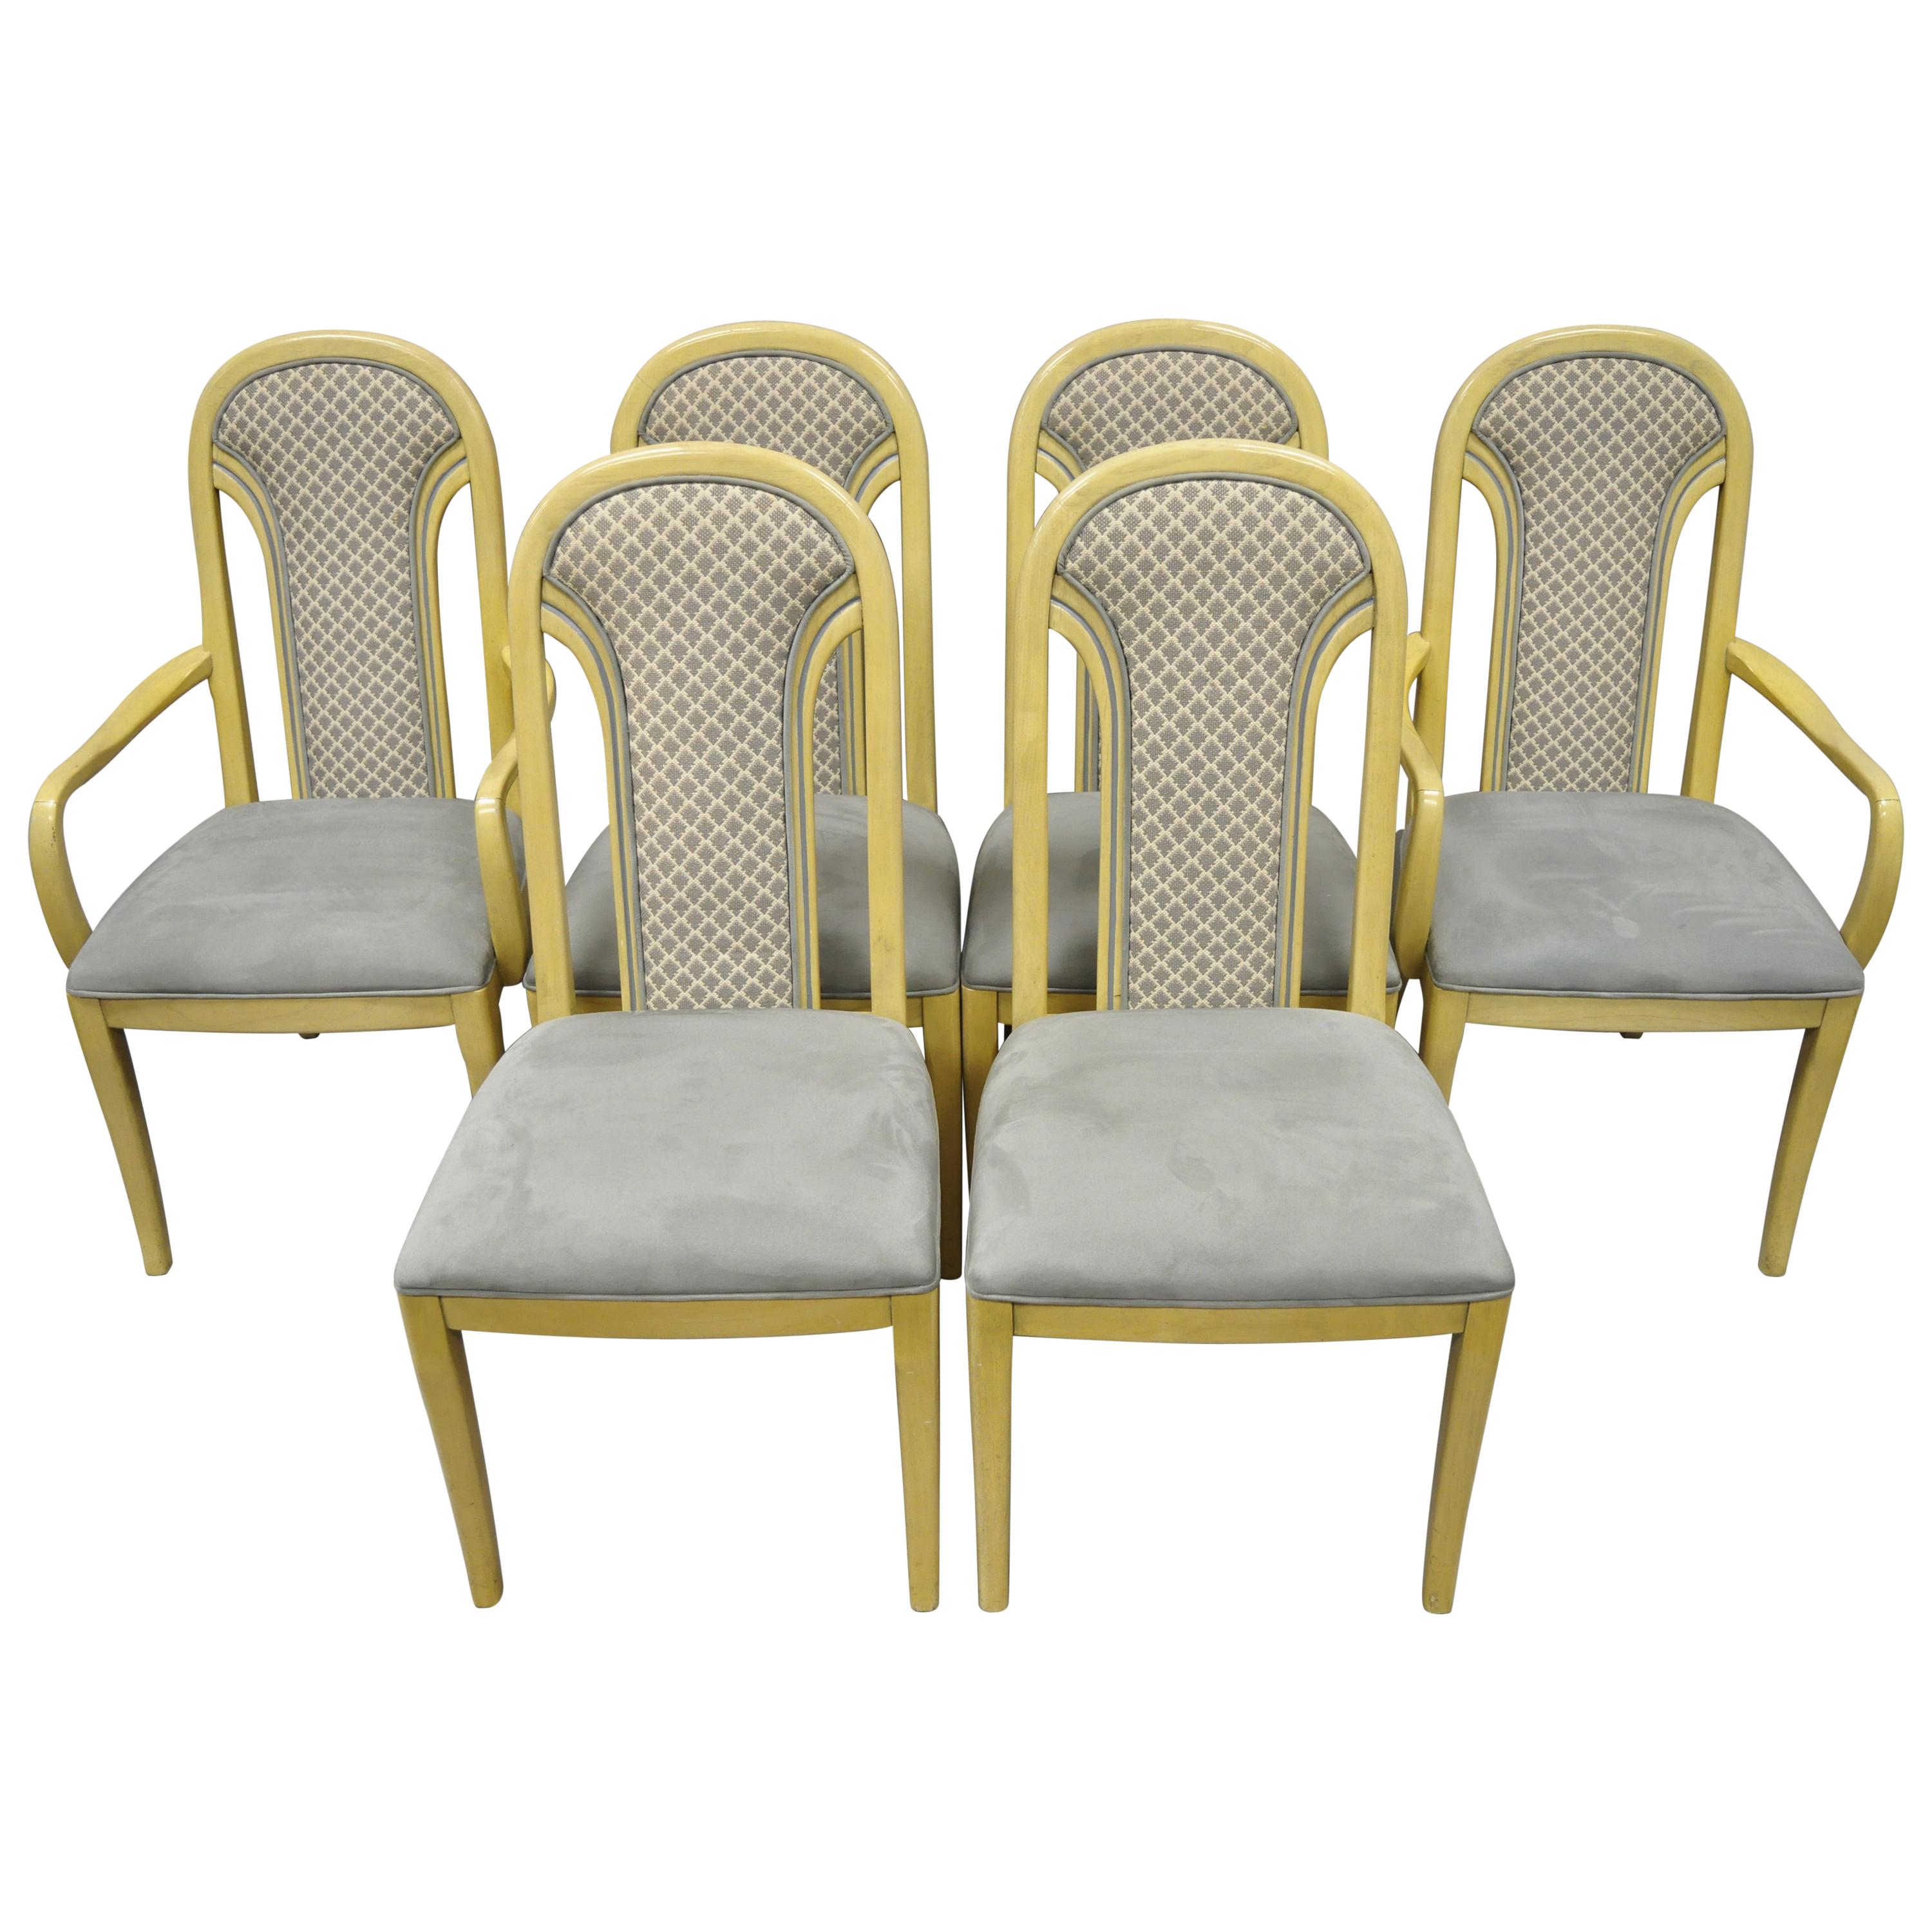 Set of 6 Art Deco Style Cream Upholstered Back Dining Chairs Henredon Attributed